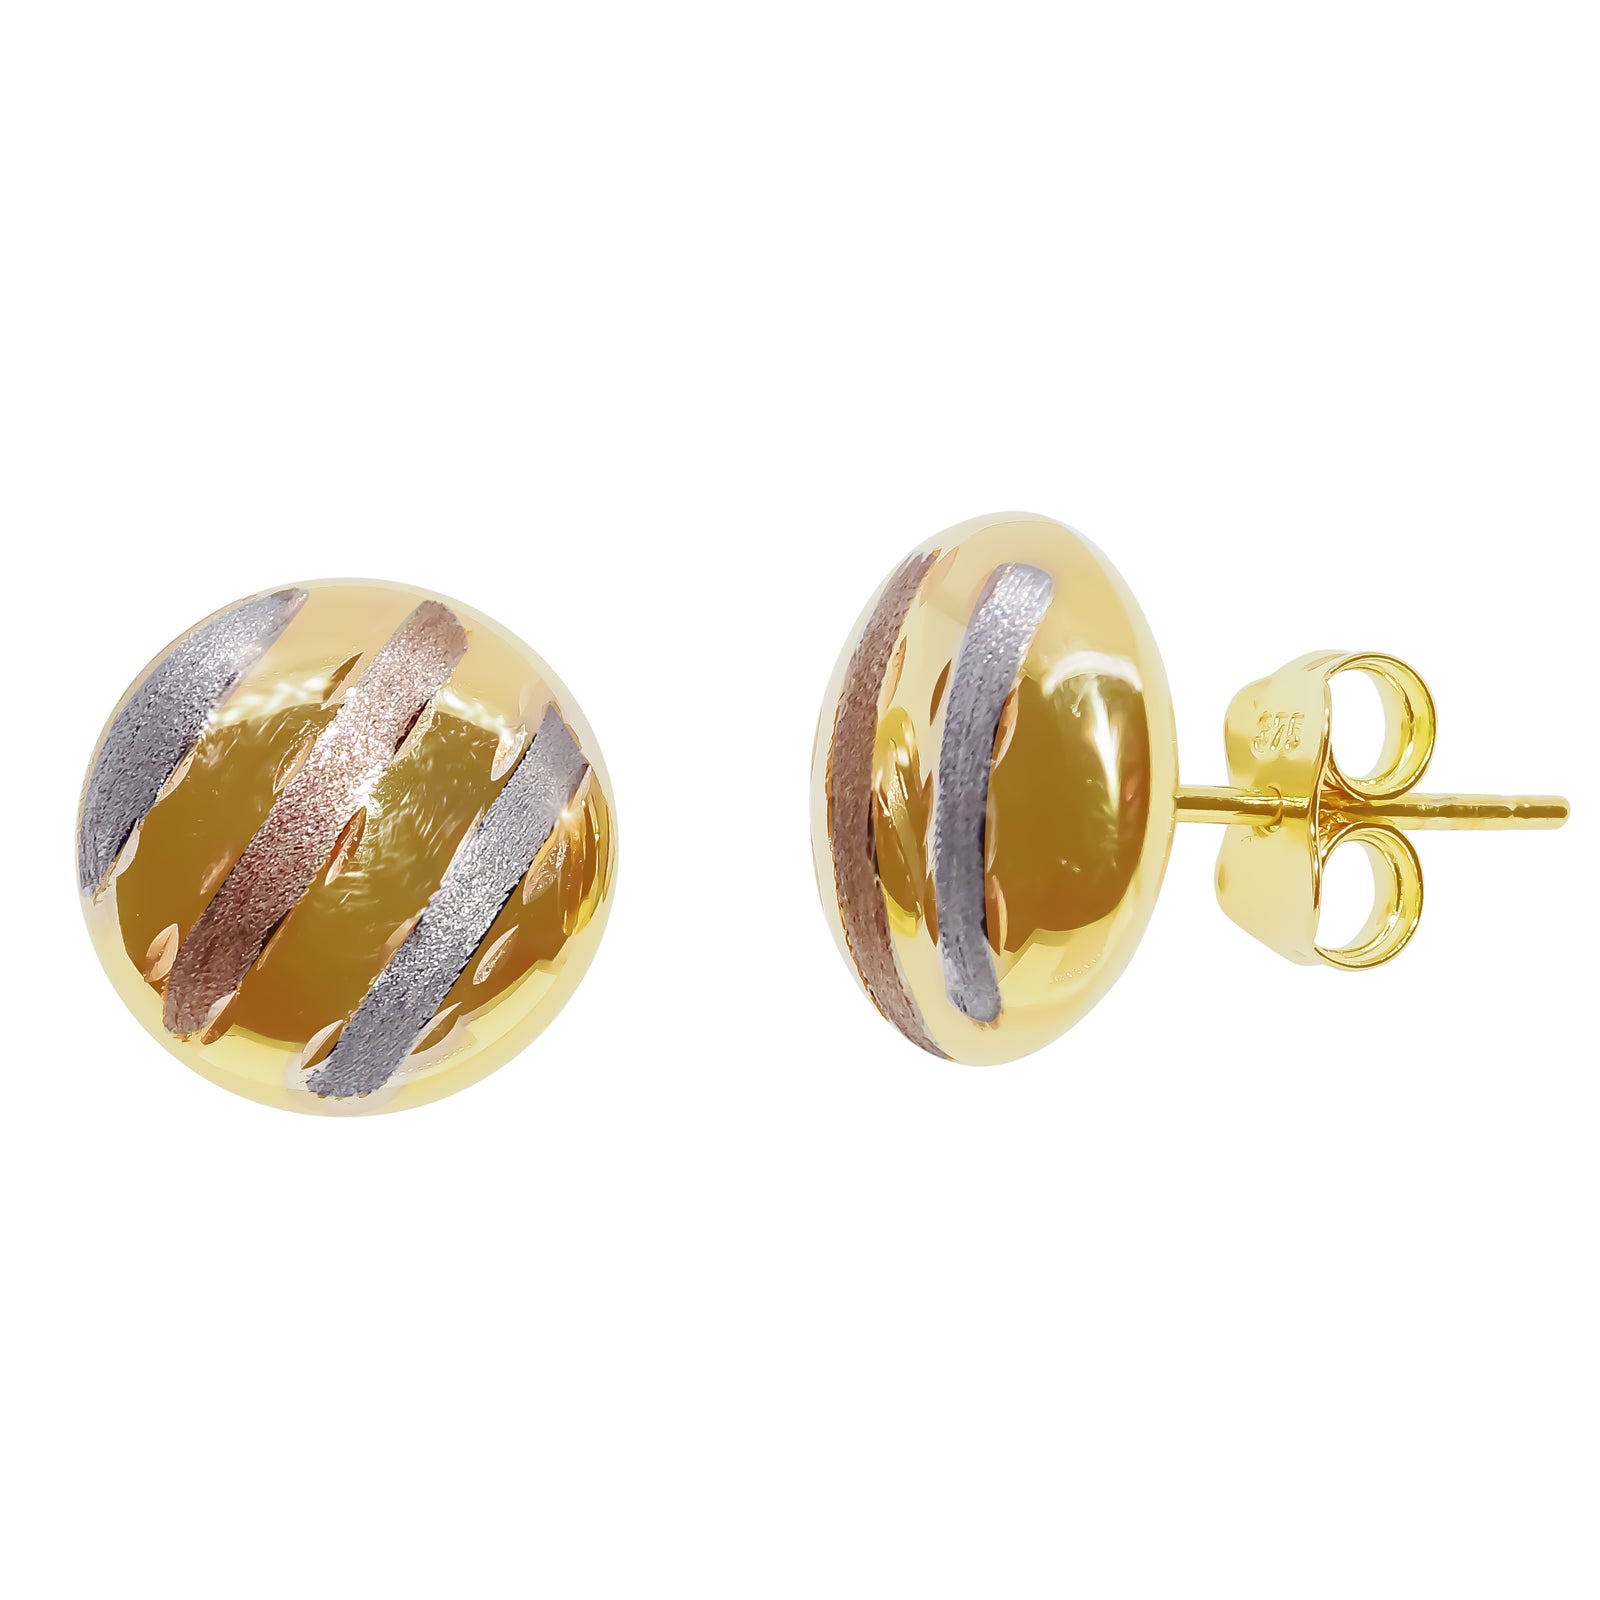 9ct gold 3 colour 11mm round stud earrings